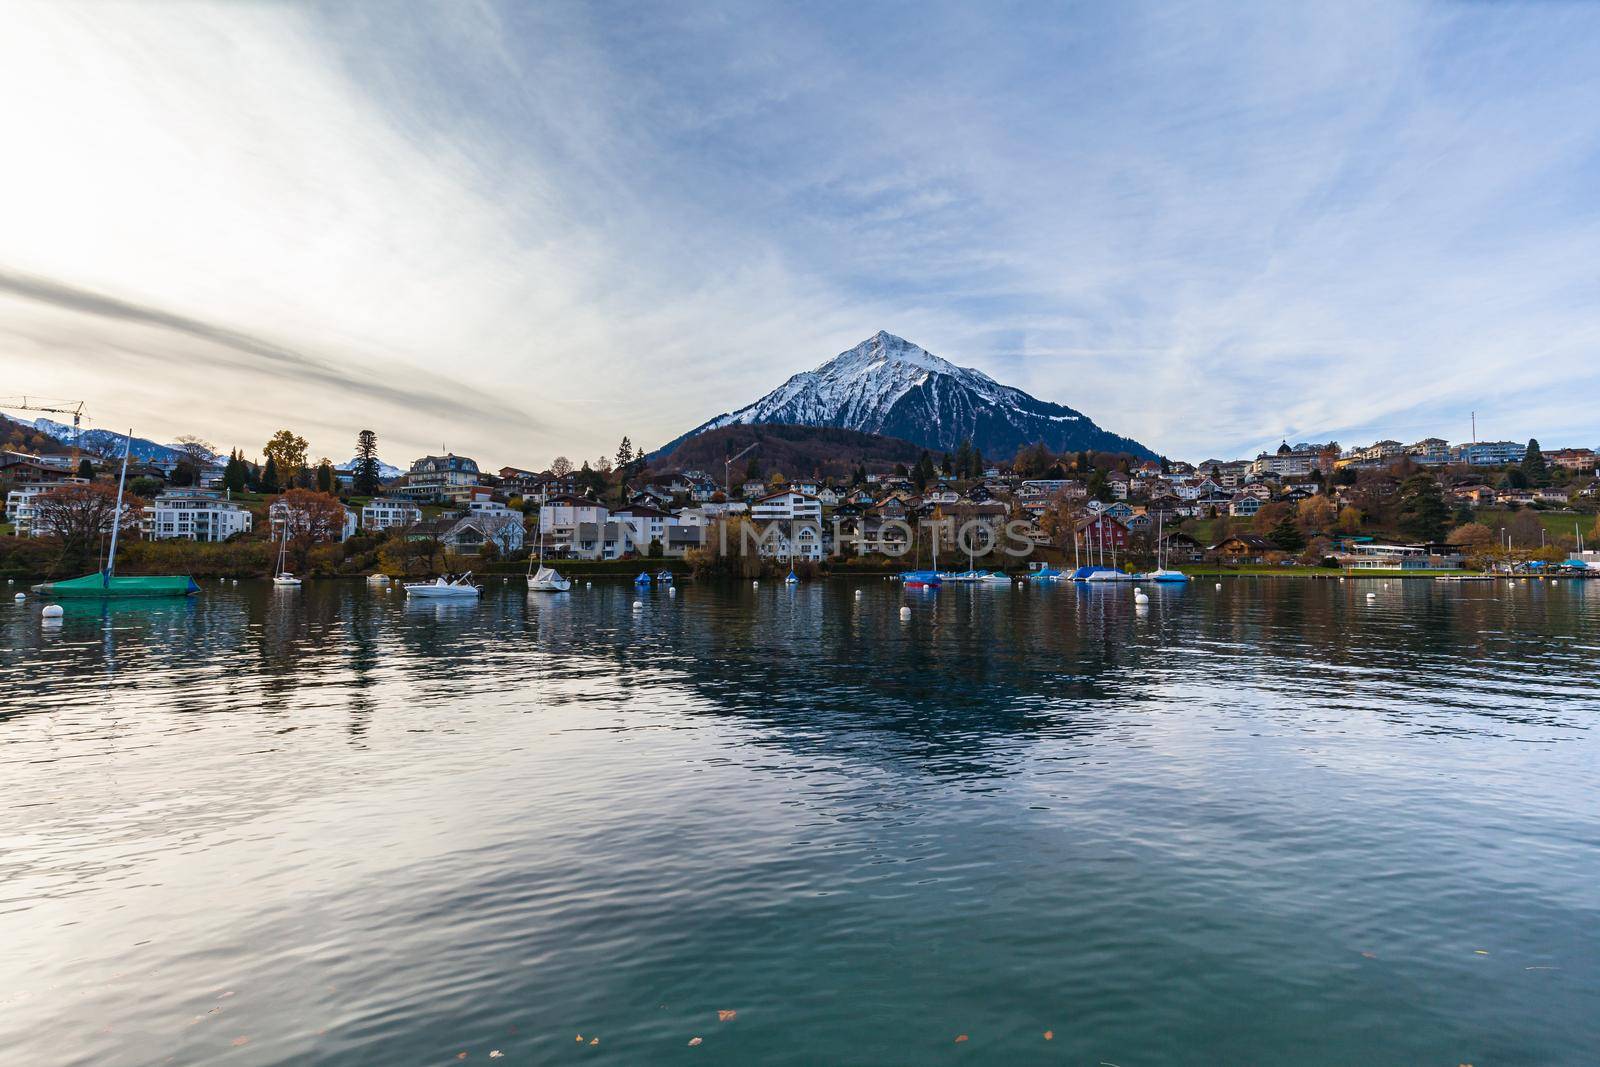 Stunning panorama view of the Spiez village with the snow covered Niederhorn of Swiss Alps on Bernese Oberland in background, from side of Lake Thun on a cloudy autumn day, Spiez, Bern, Switzerland by VogelSP